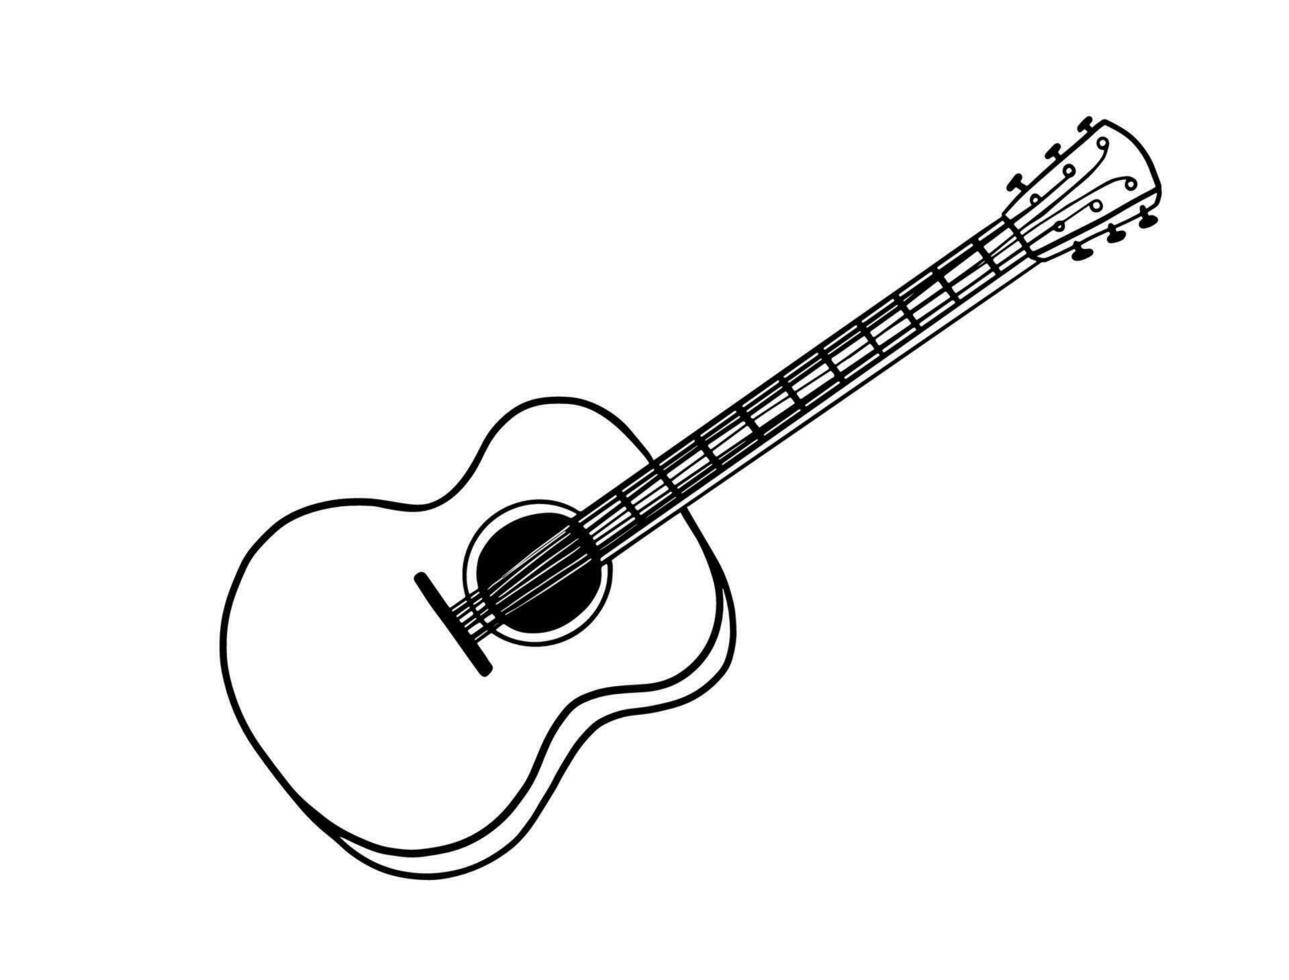 Hand drawn doodle of classical guitar. Musical instrument. Sketch of acoustic guitar or ukulele. Vector illustration isolated on white background